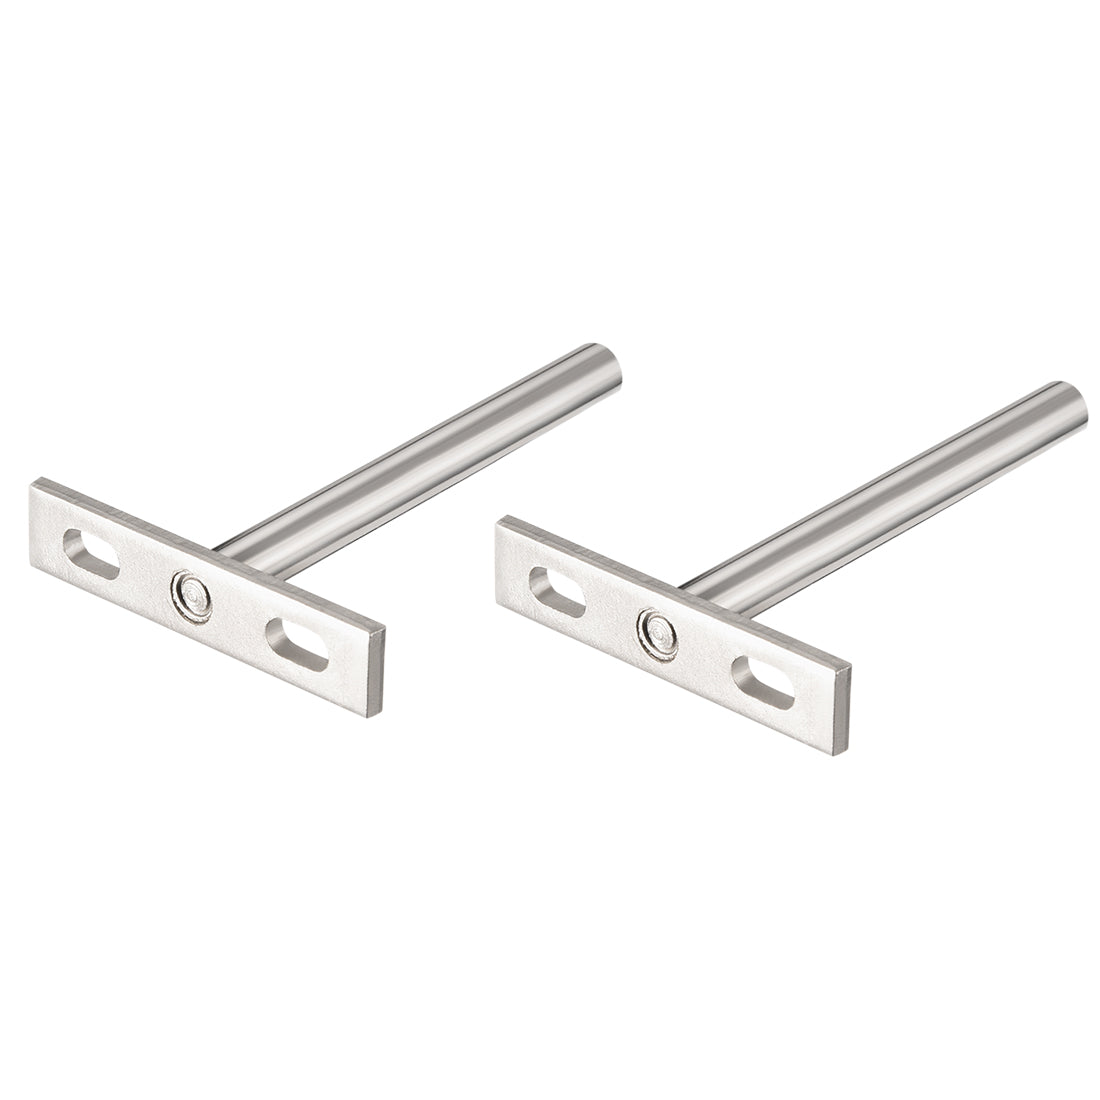 uxcell Uxcell Invisible Floating Shelf Brackets, 4" (100mm), Hidden Blind Supports for Concealed Shelves, Pack of 2